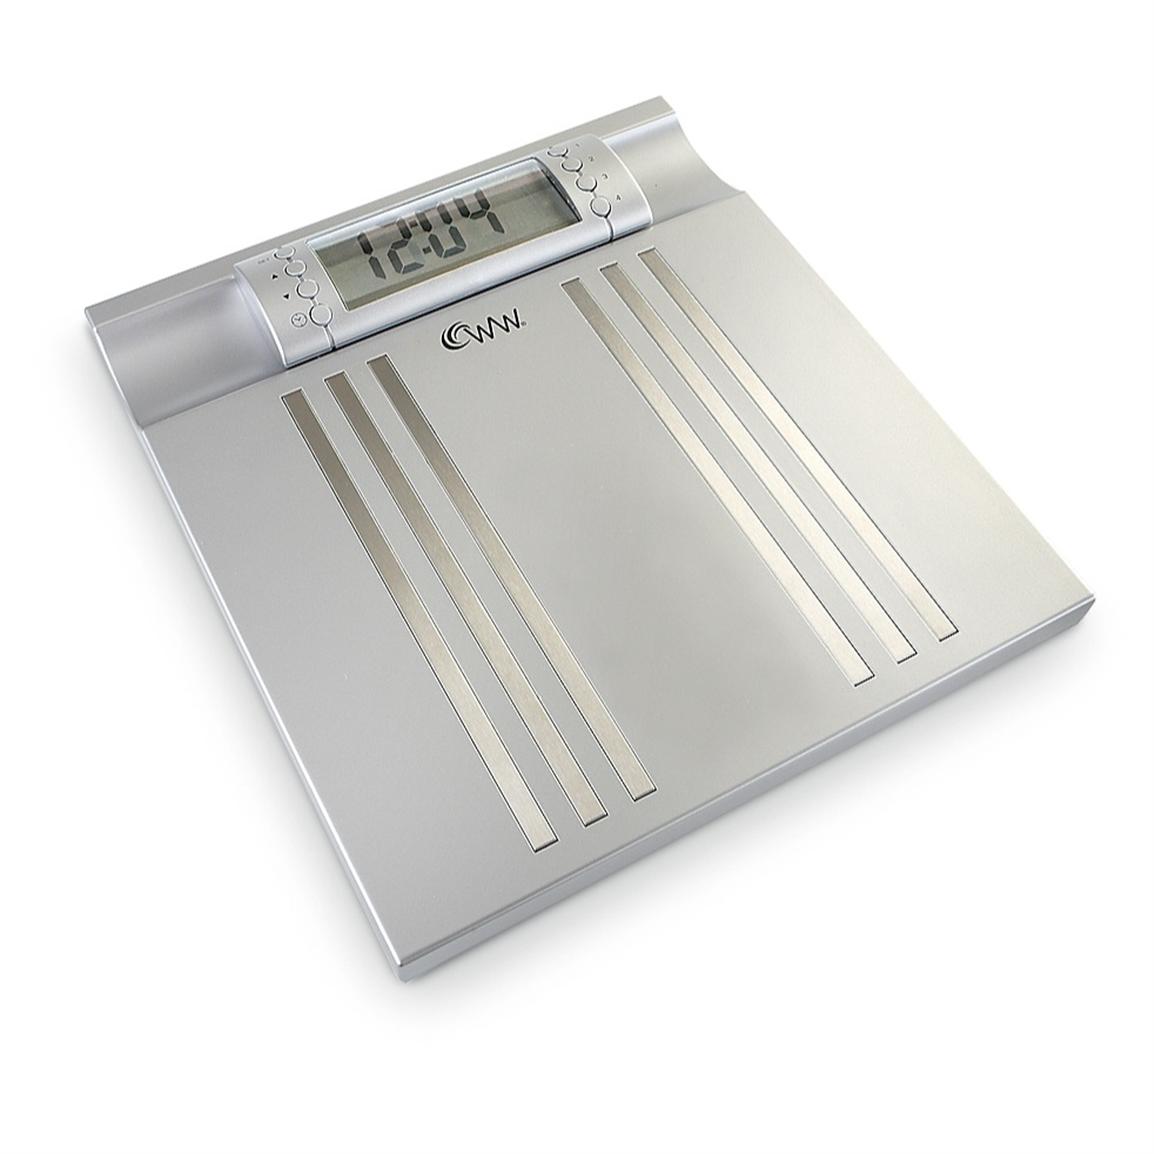 Conair® Weight Watchers® Electronic Scale - 197779, Healthy Living at